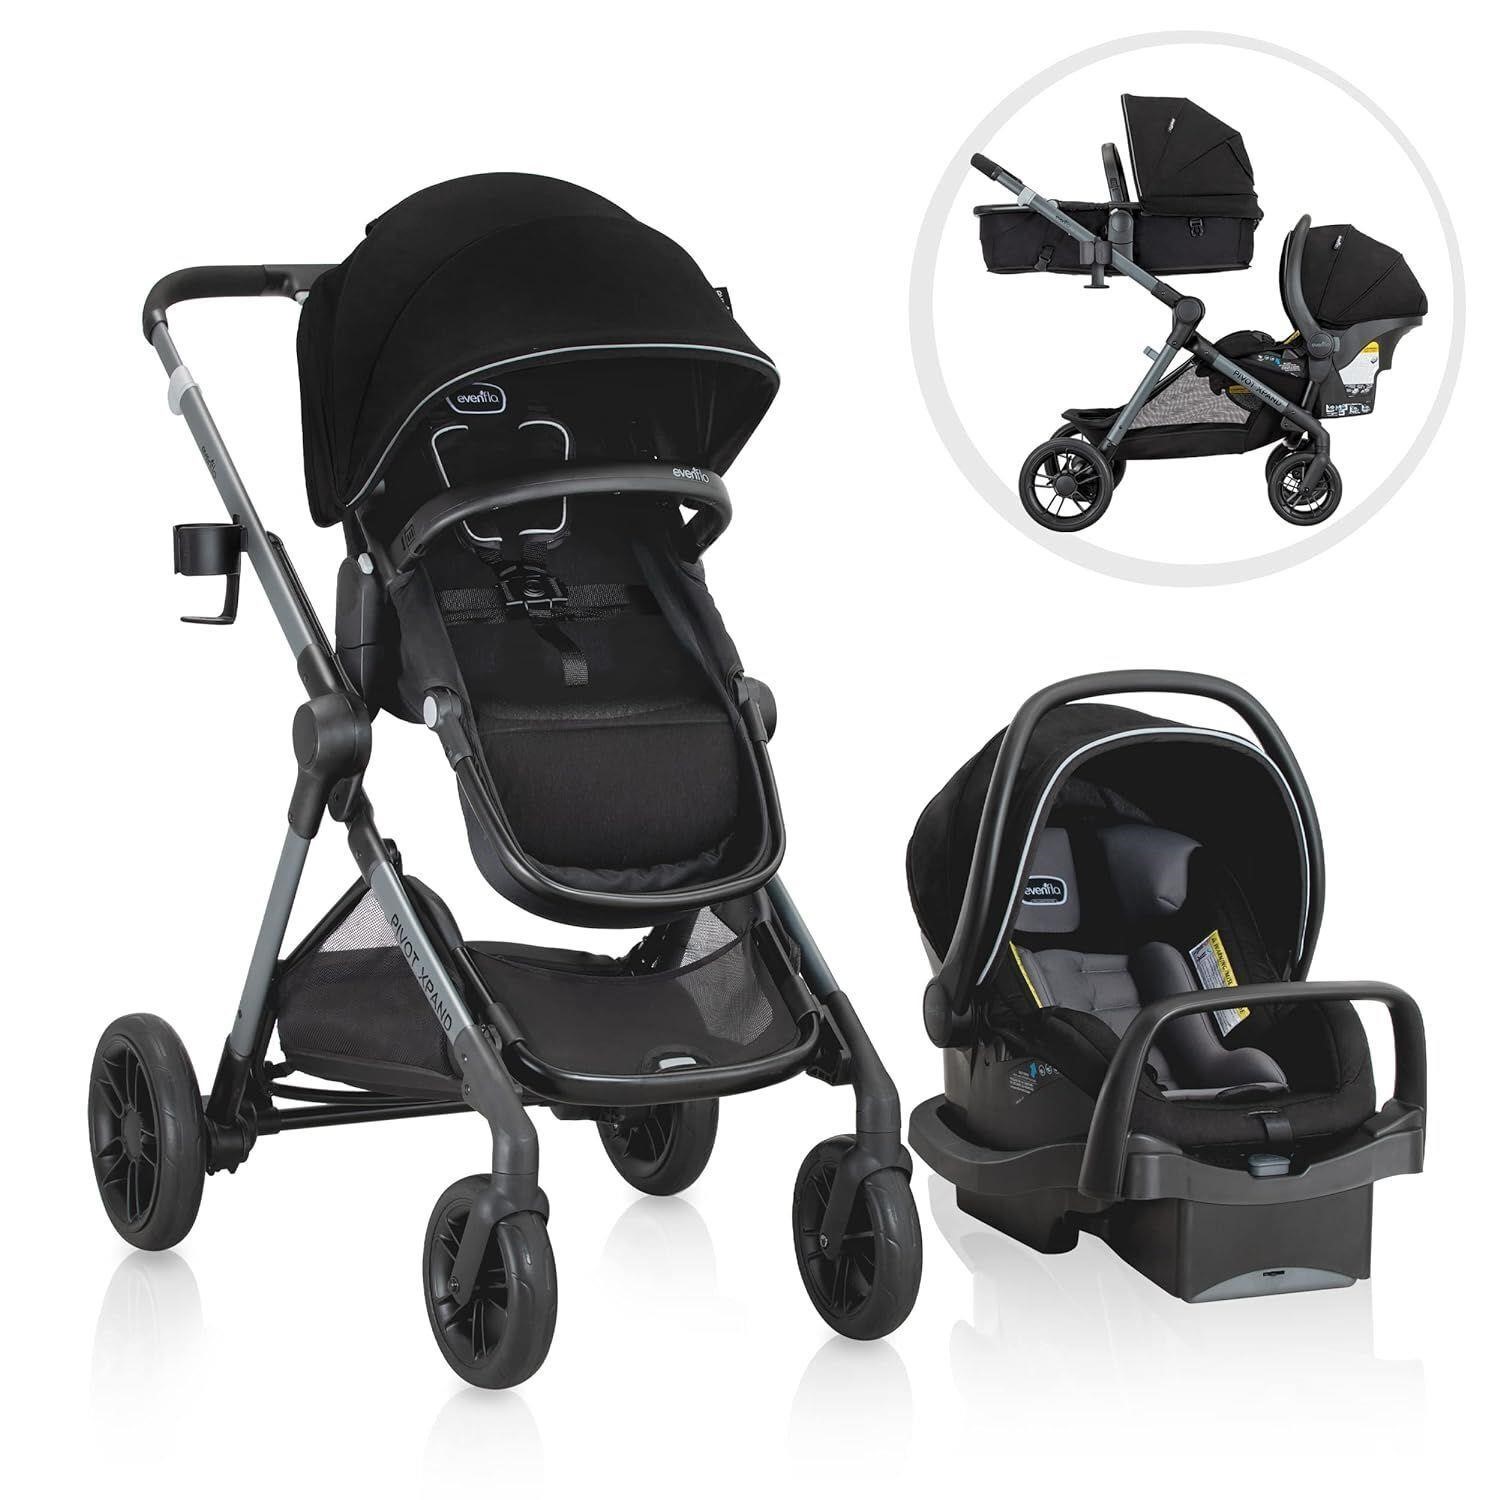 Evenflo Modular Travel System with Infant Car Seat